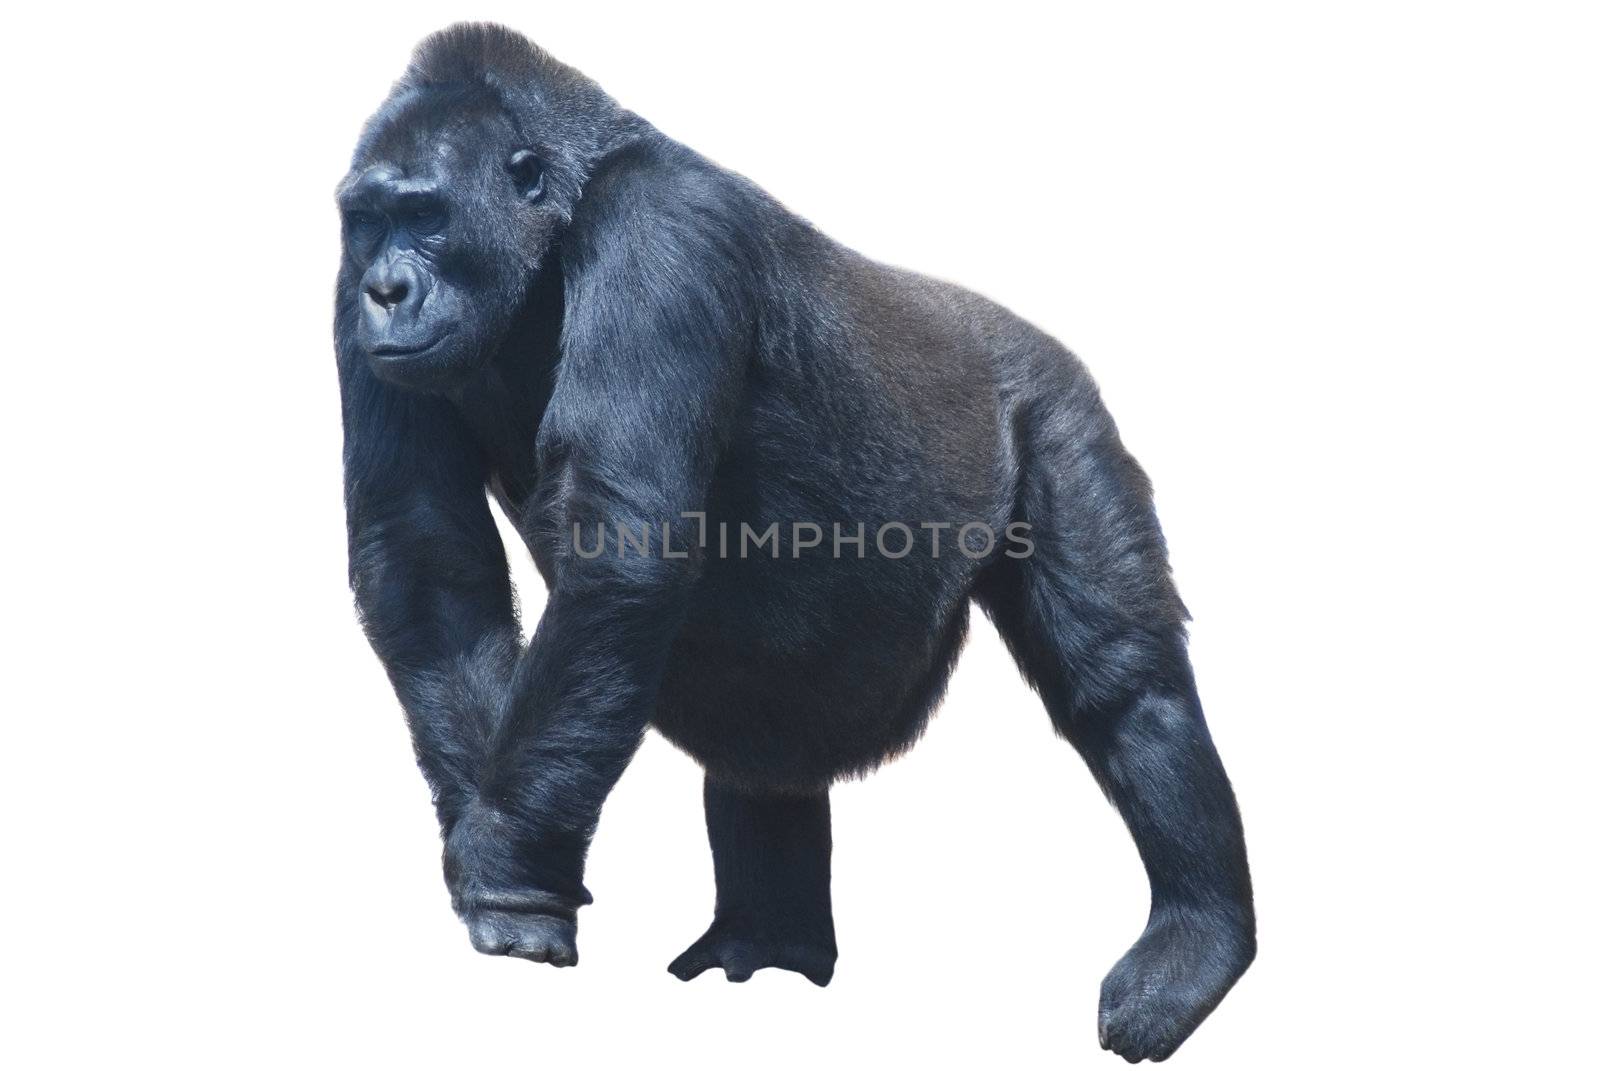 close up of a big black hairy gorilla isolated on white